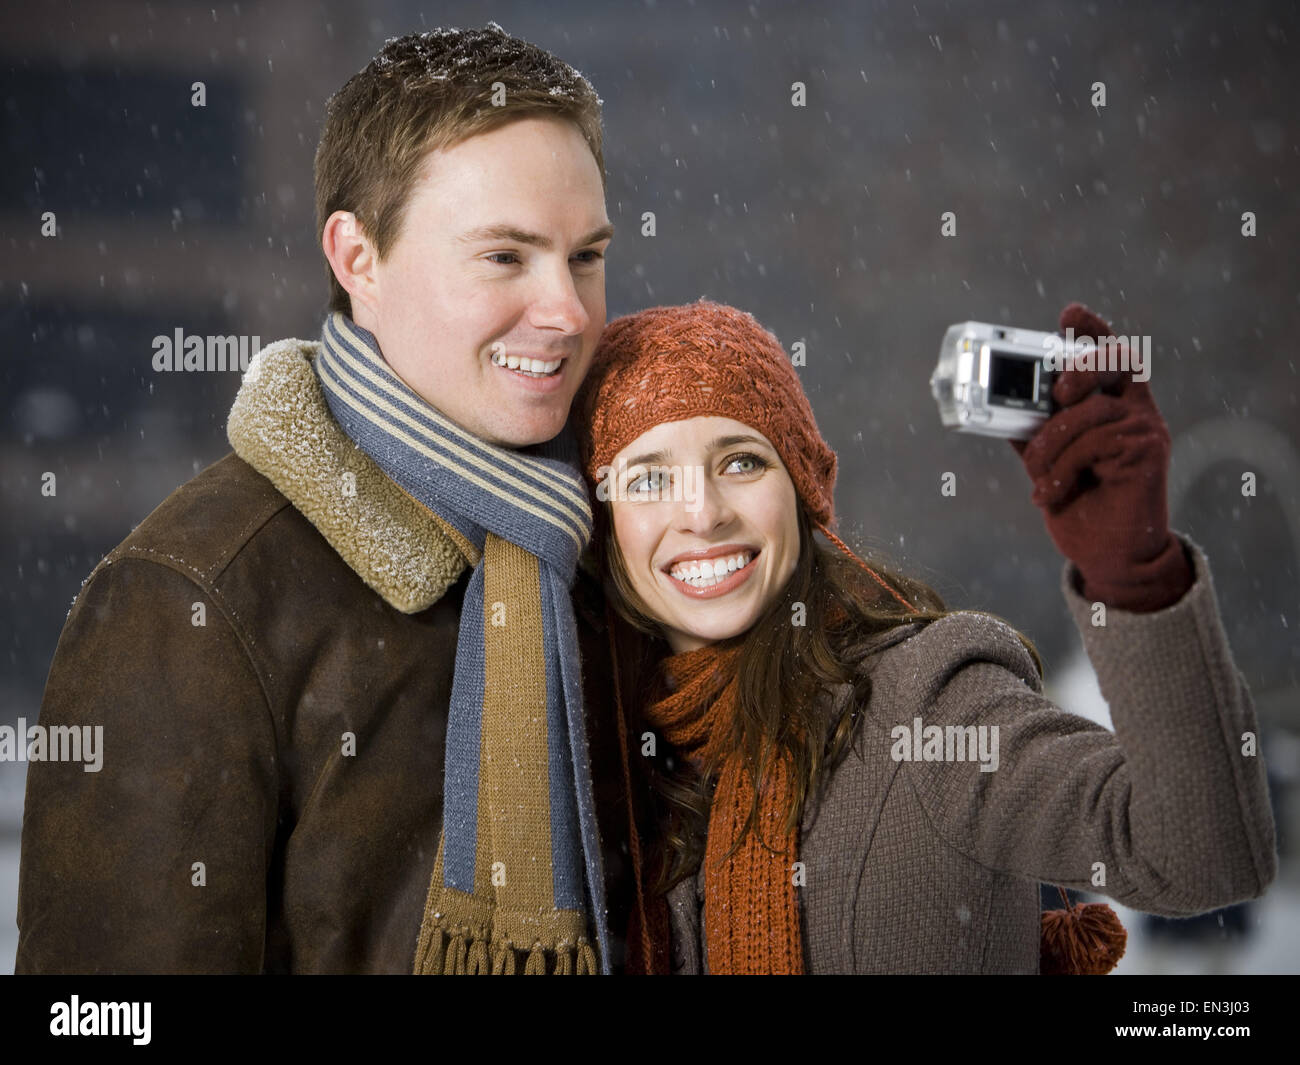 Man and woman taking a photo outdoors in winter Stock Photo